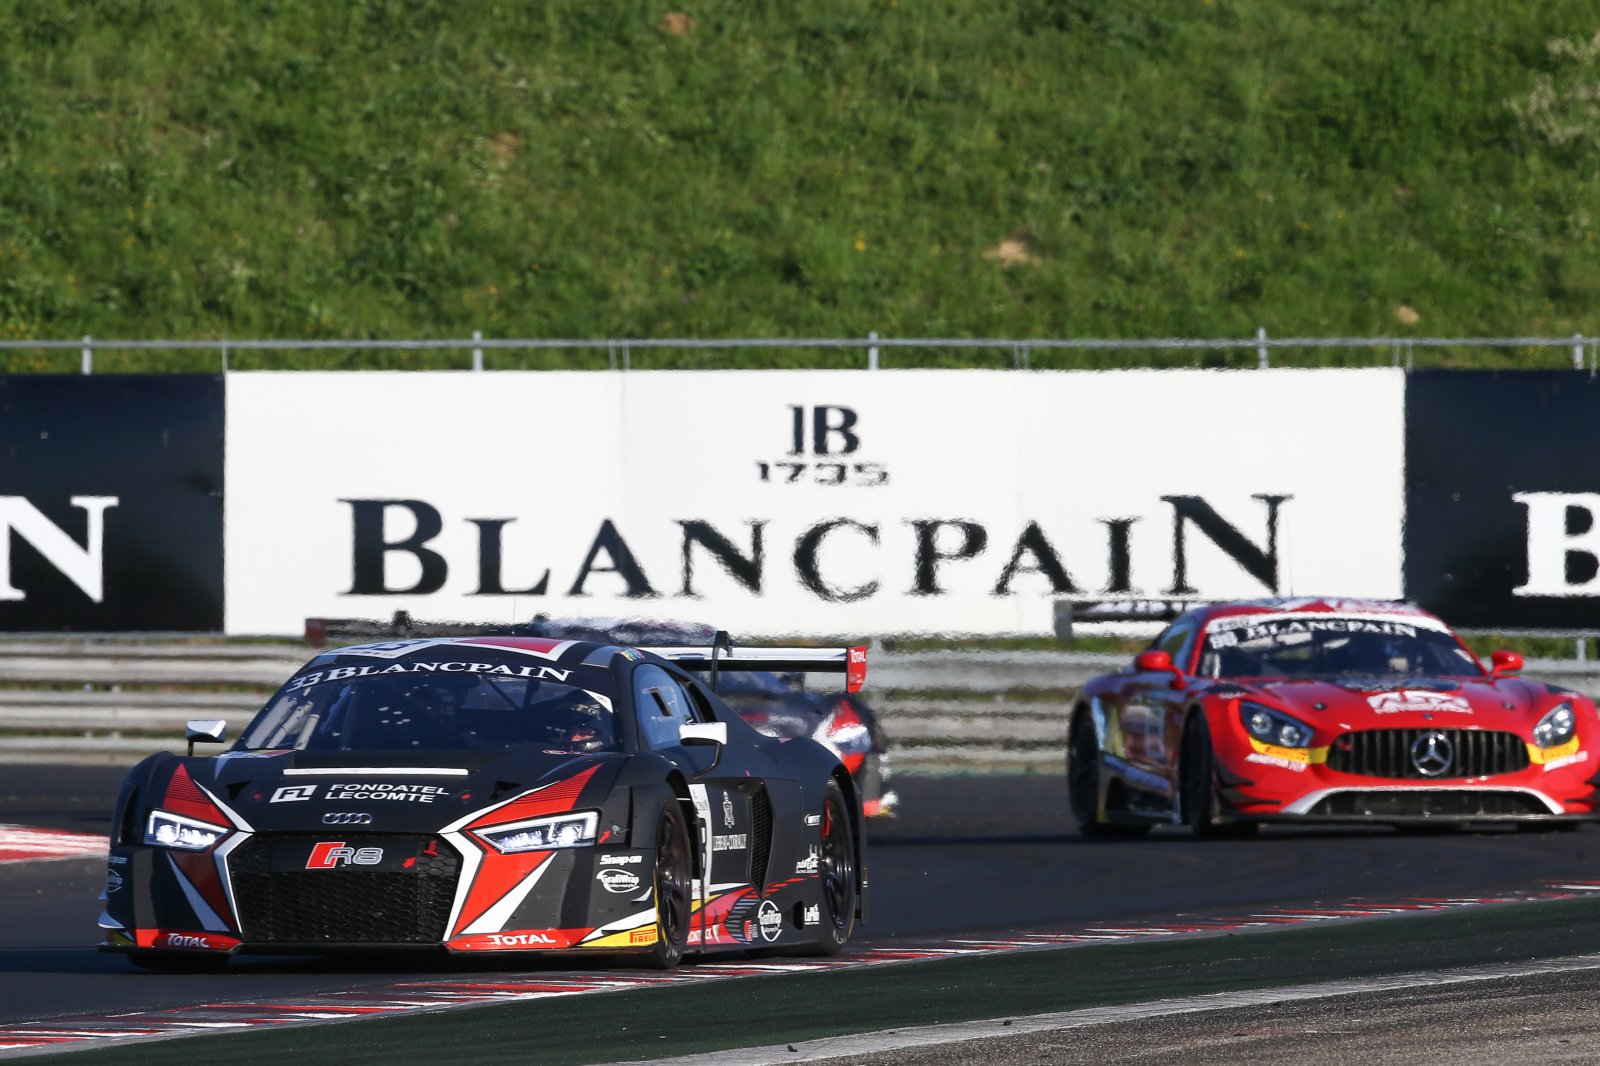 Ide and Mies resist rivals to claim Sprint Cup Qualifying Race victory in Hungary 